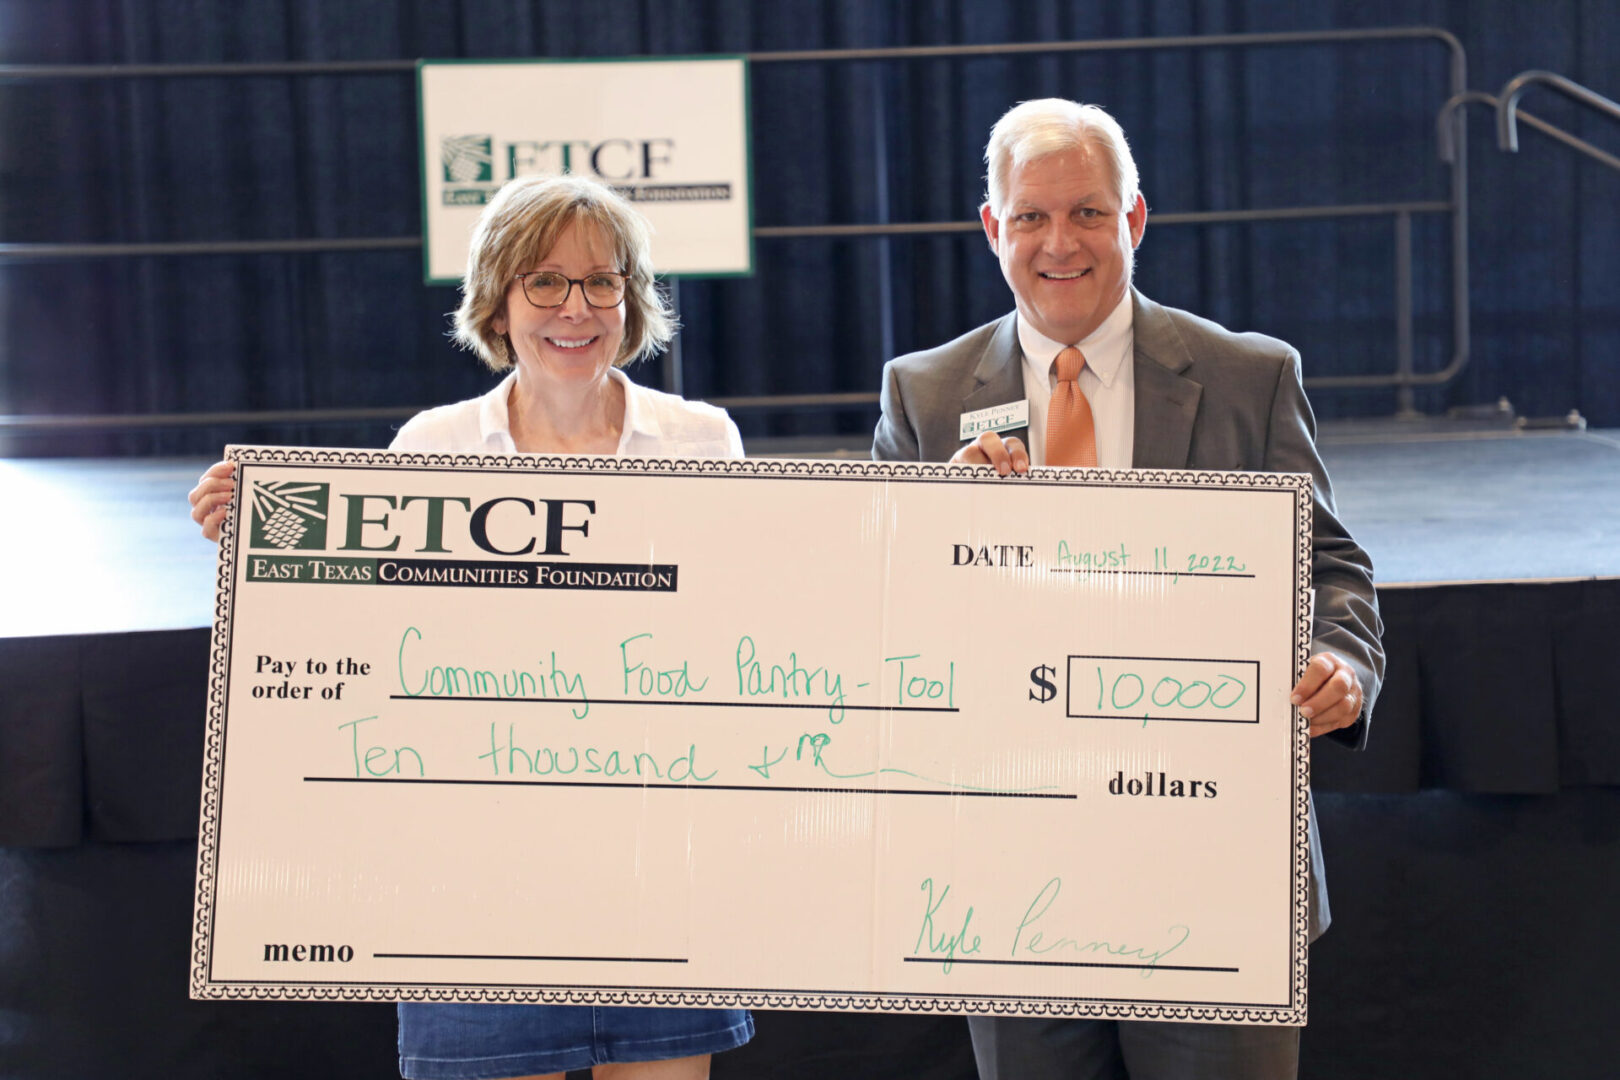 A man and woman holding up a large check.